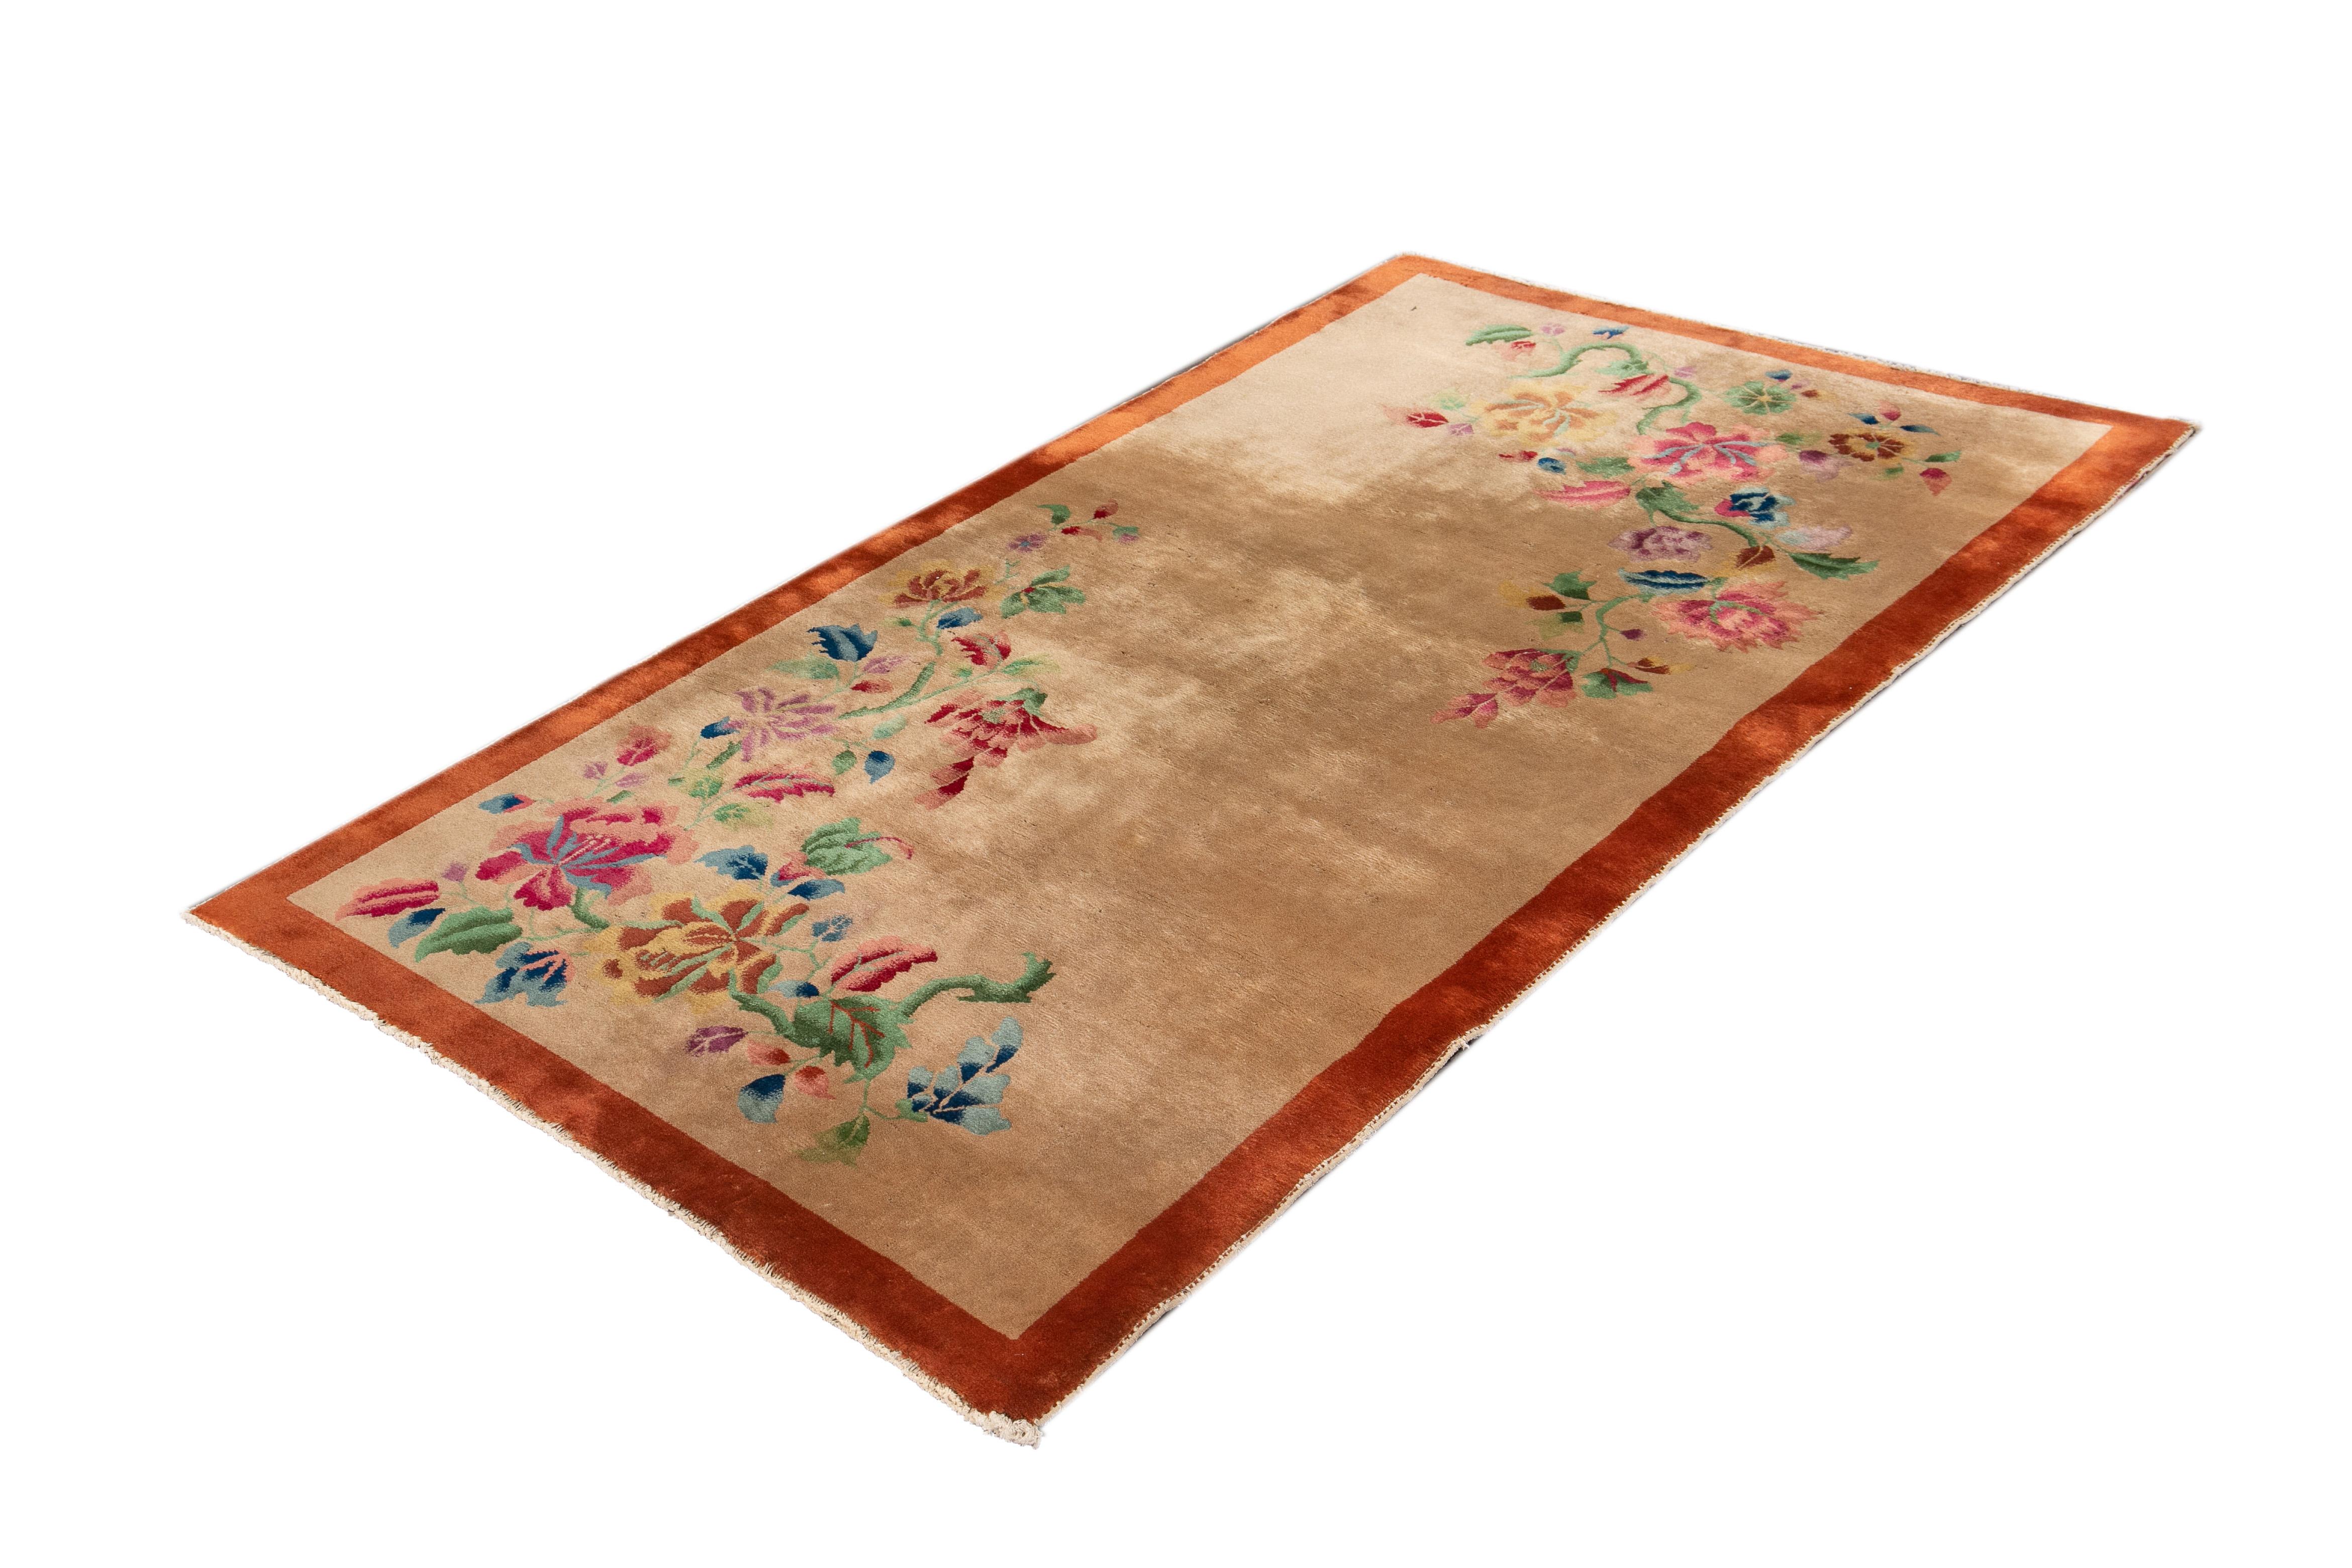 Beautiful antique Chinese Art Deco rug with a beige field and orange border with multicolored accents and an all over floral design. 

This rug measures 4' 0